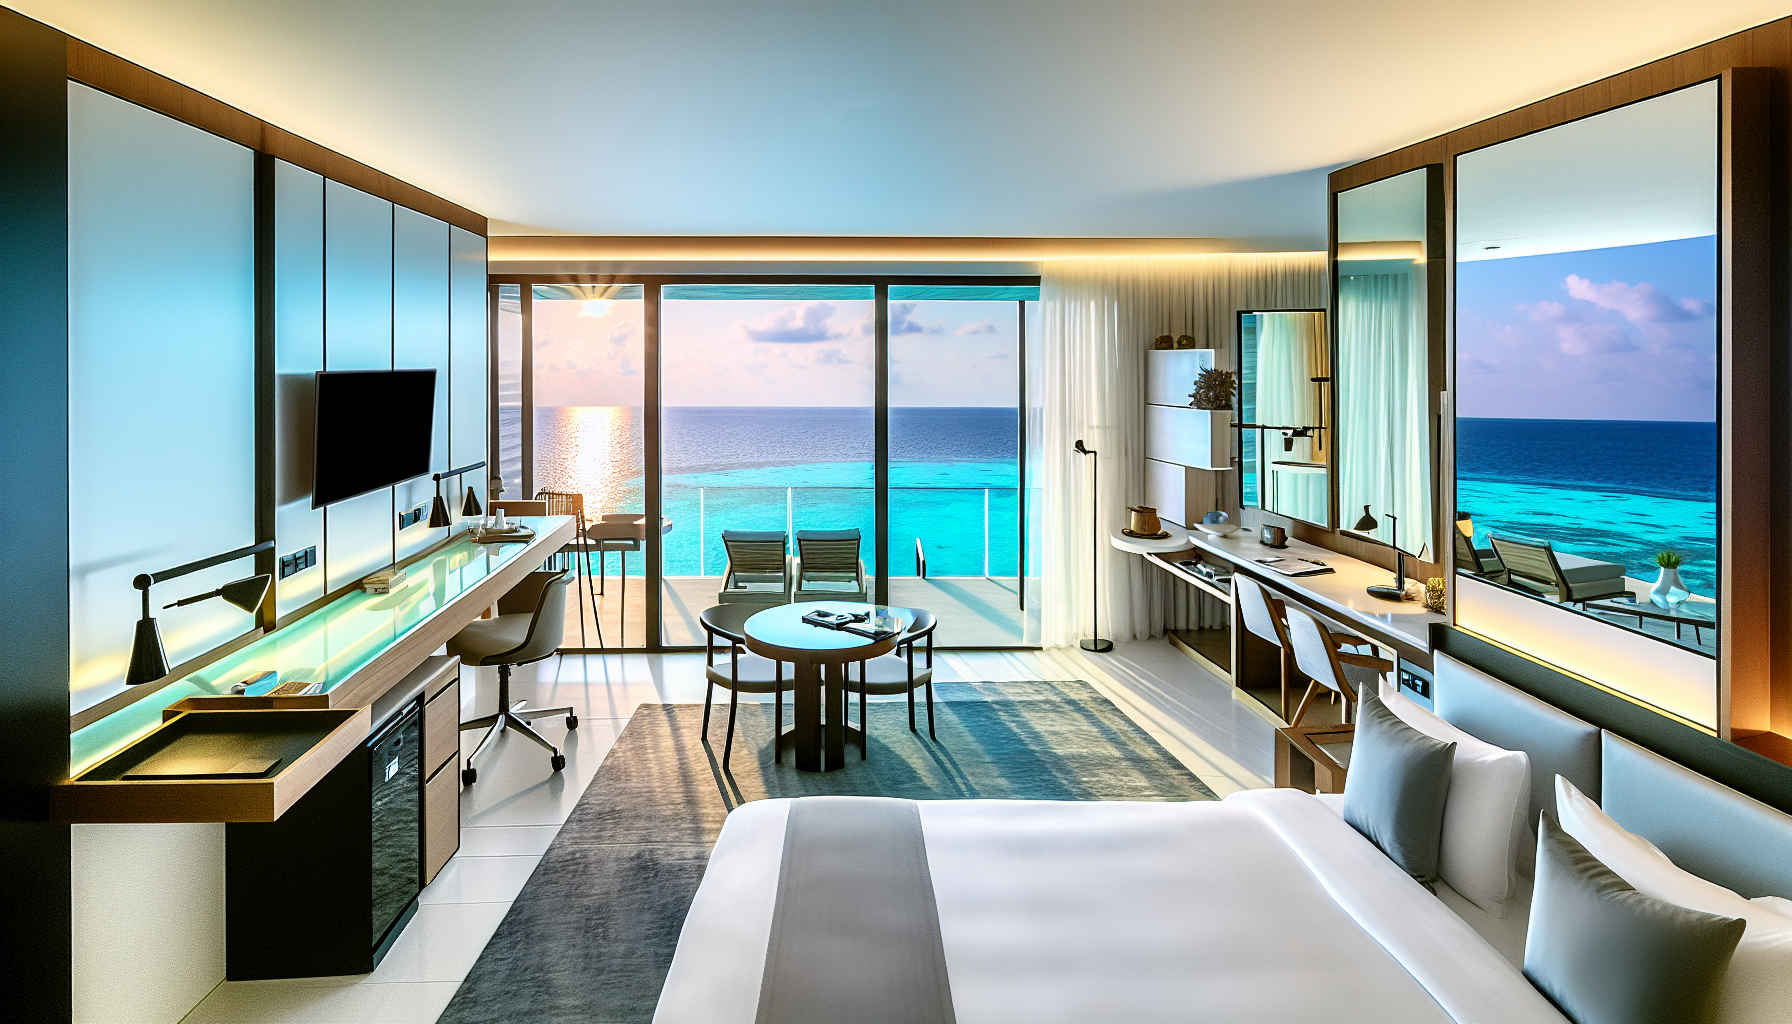 Luxurious hotel room with ocean view